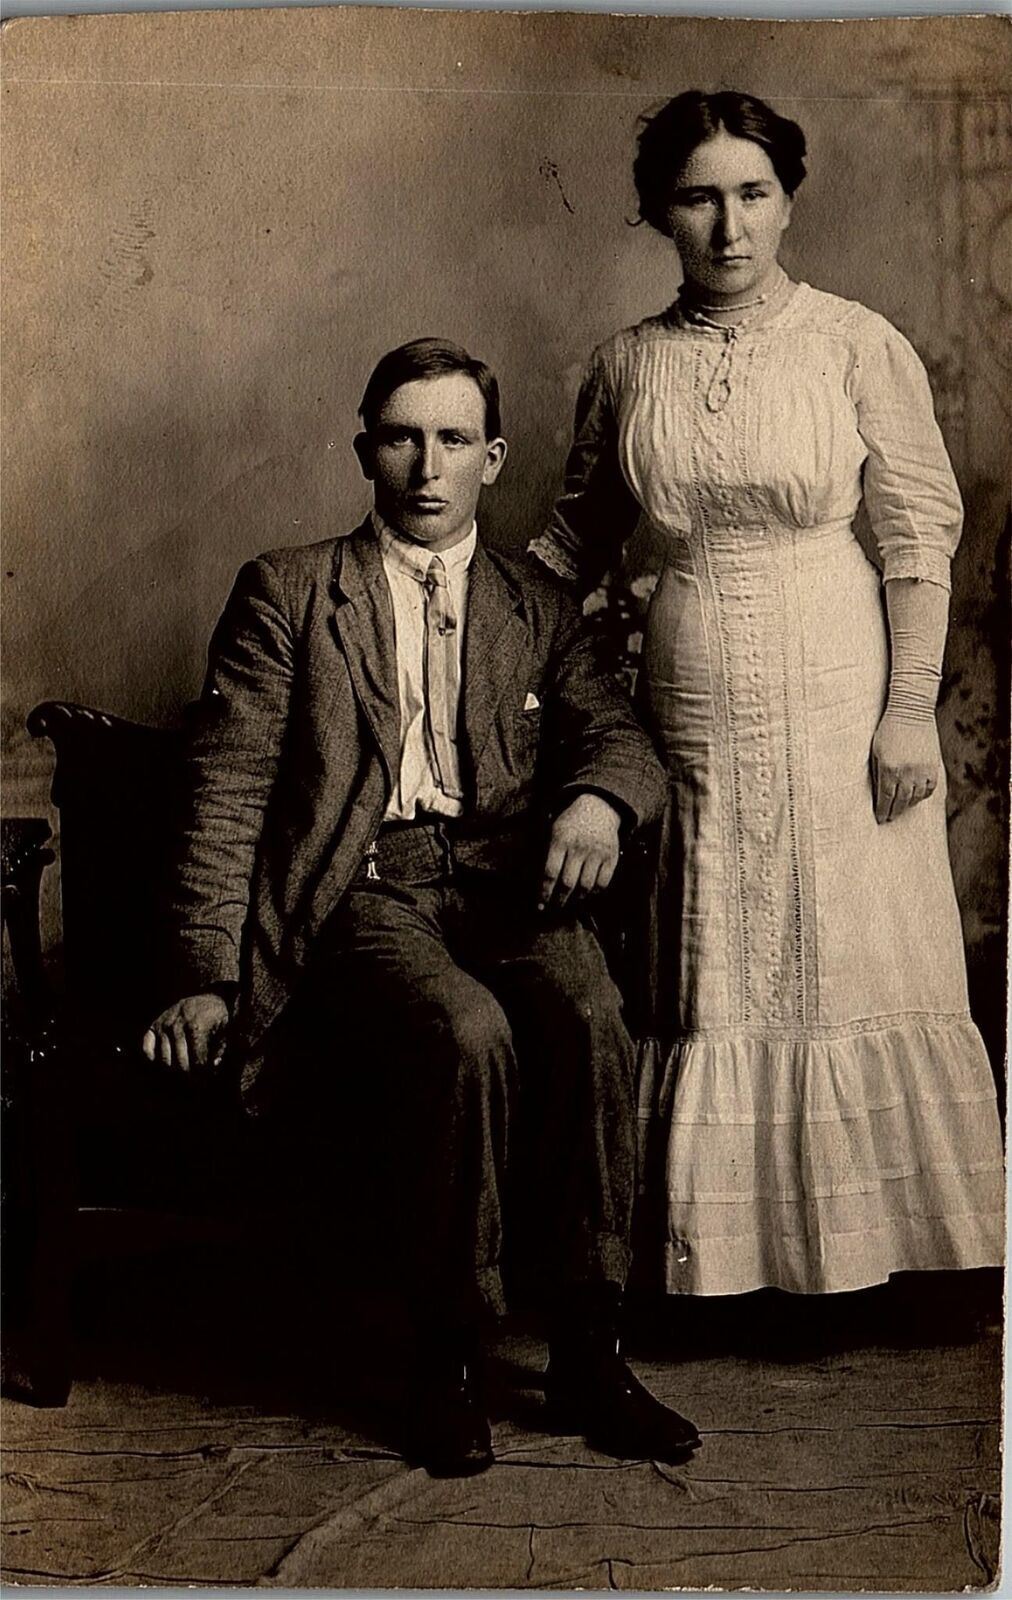 c1910 NICE LOOKING WELL DRESSED YOUNG COUPLE REAL PHOTO RPPC POSTCARD 38-19